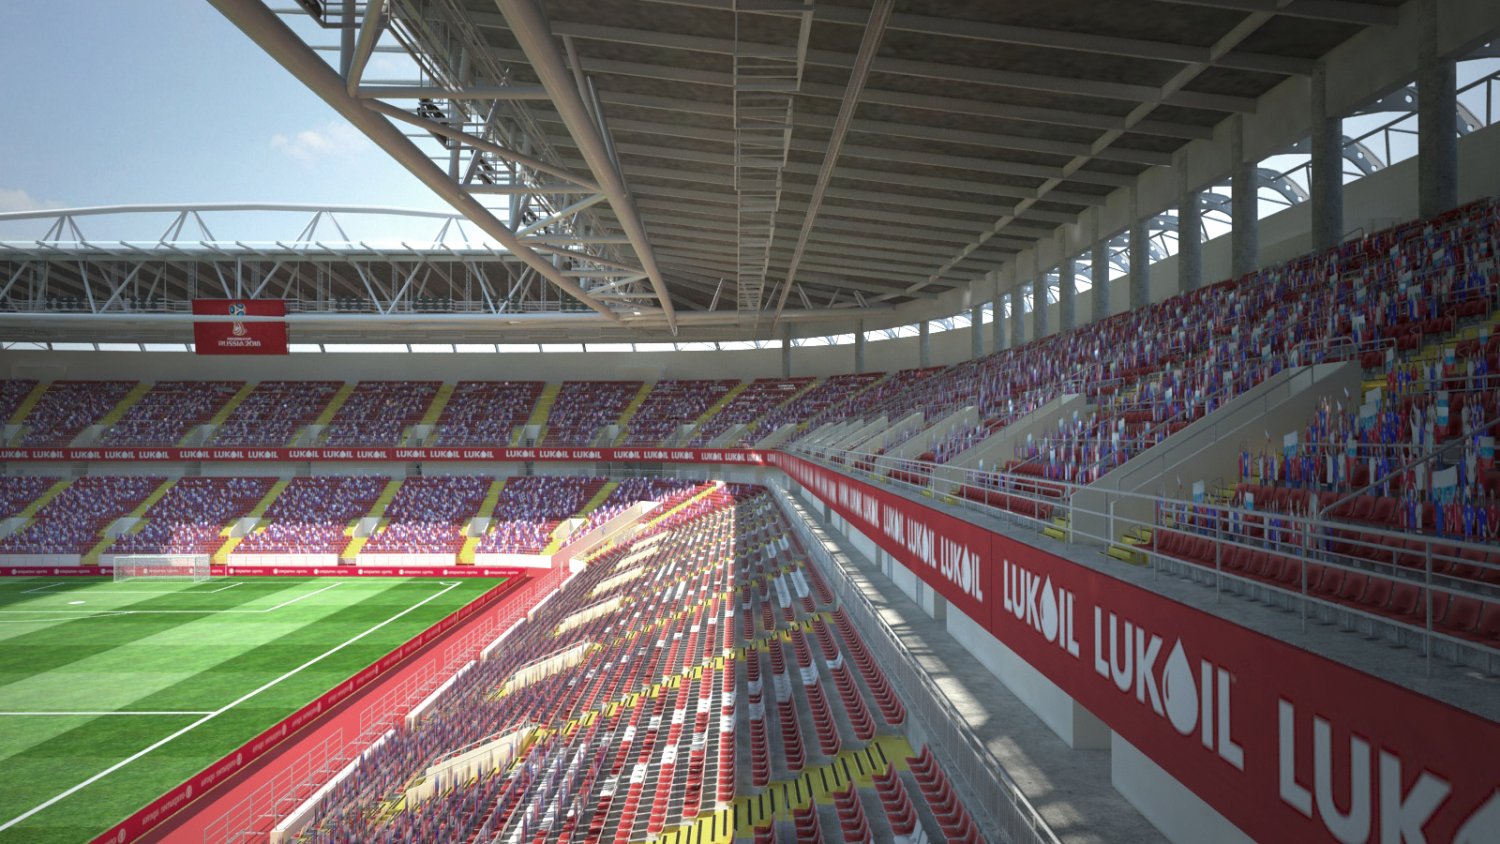 Spartak Arena Moscow - 3D Model by SQUIR